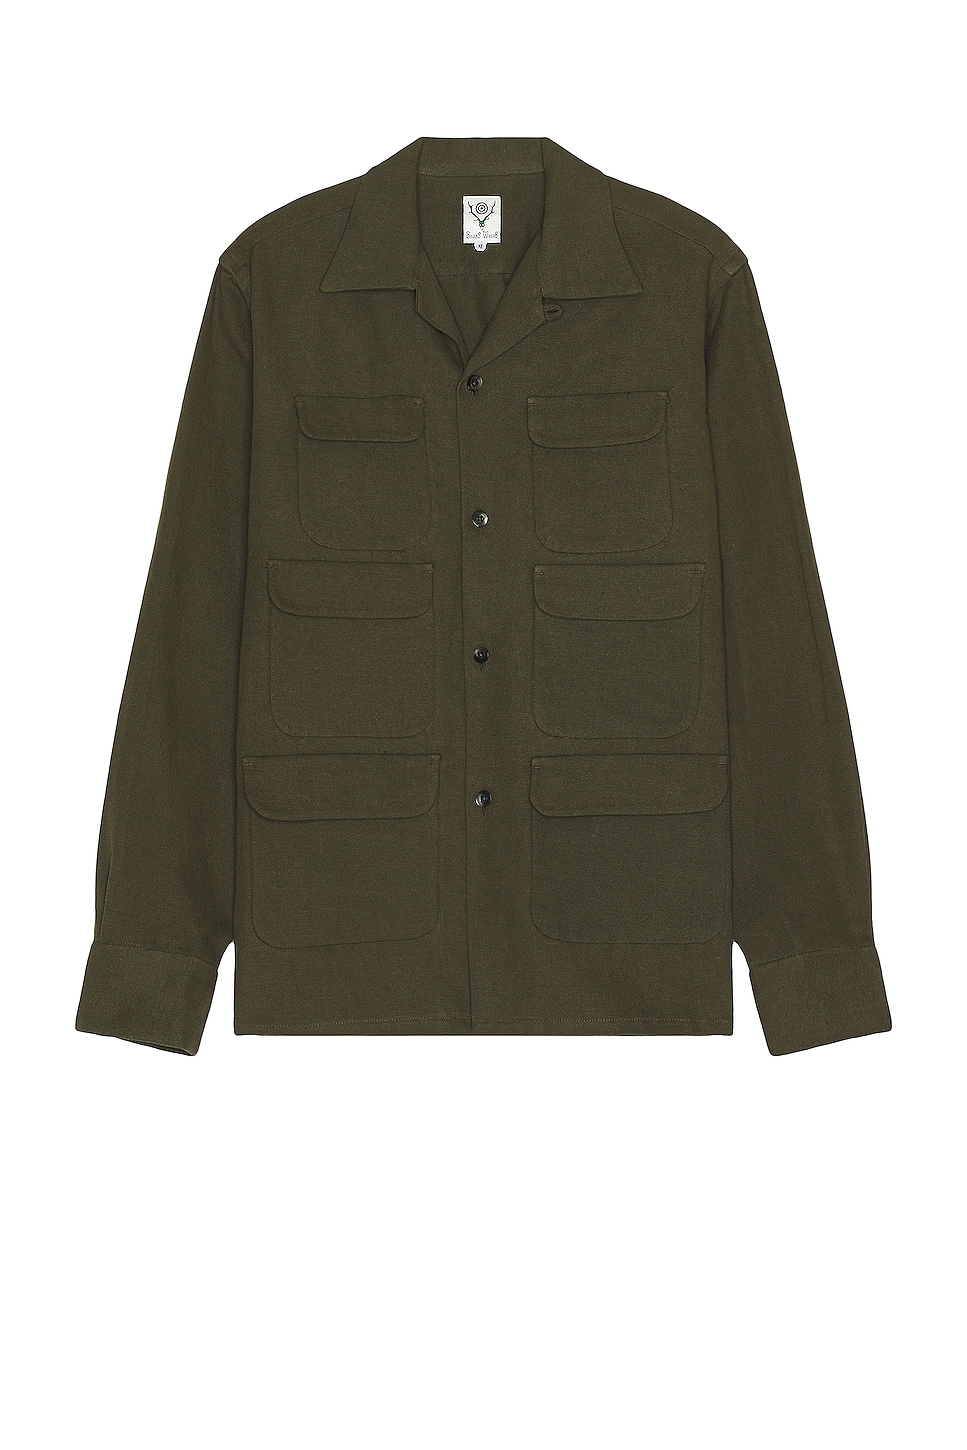 Image 1 of South2 West8 6 Pocket Classic Shirt in Olive